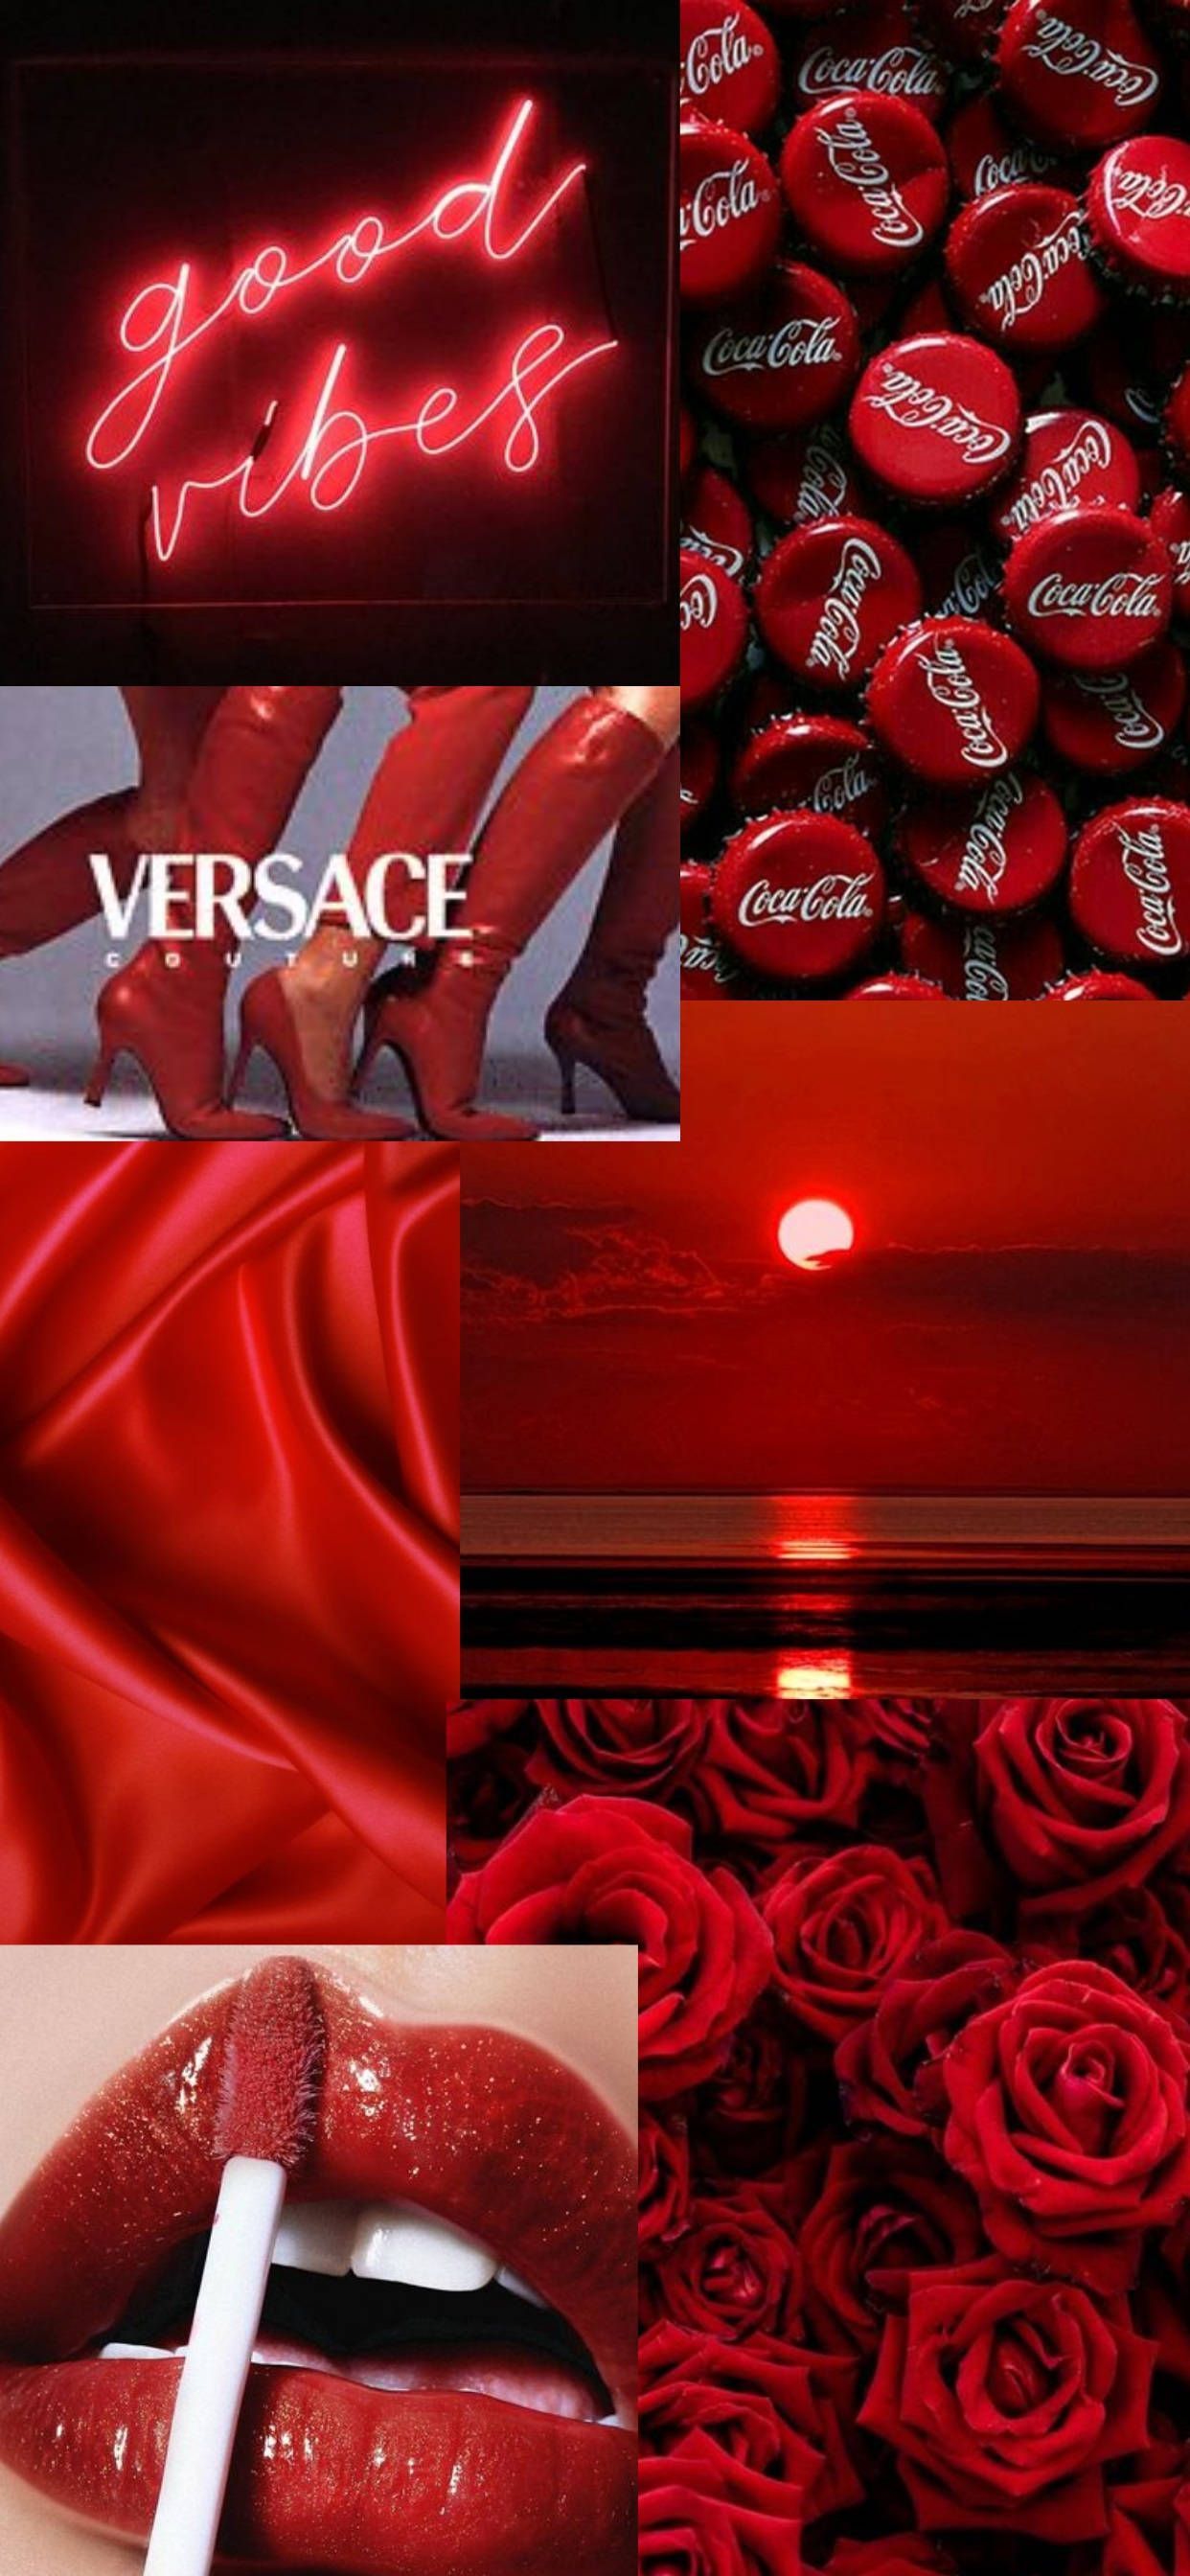 Download Versace Glossy Red Aesthetic iPhone Wallpaper